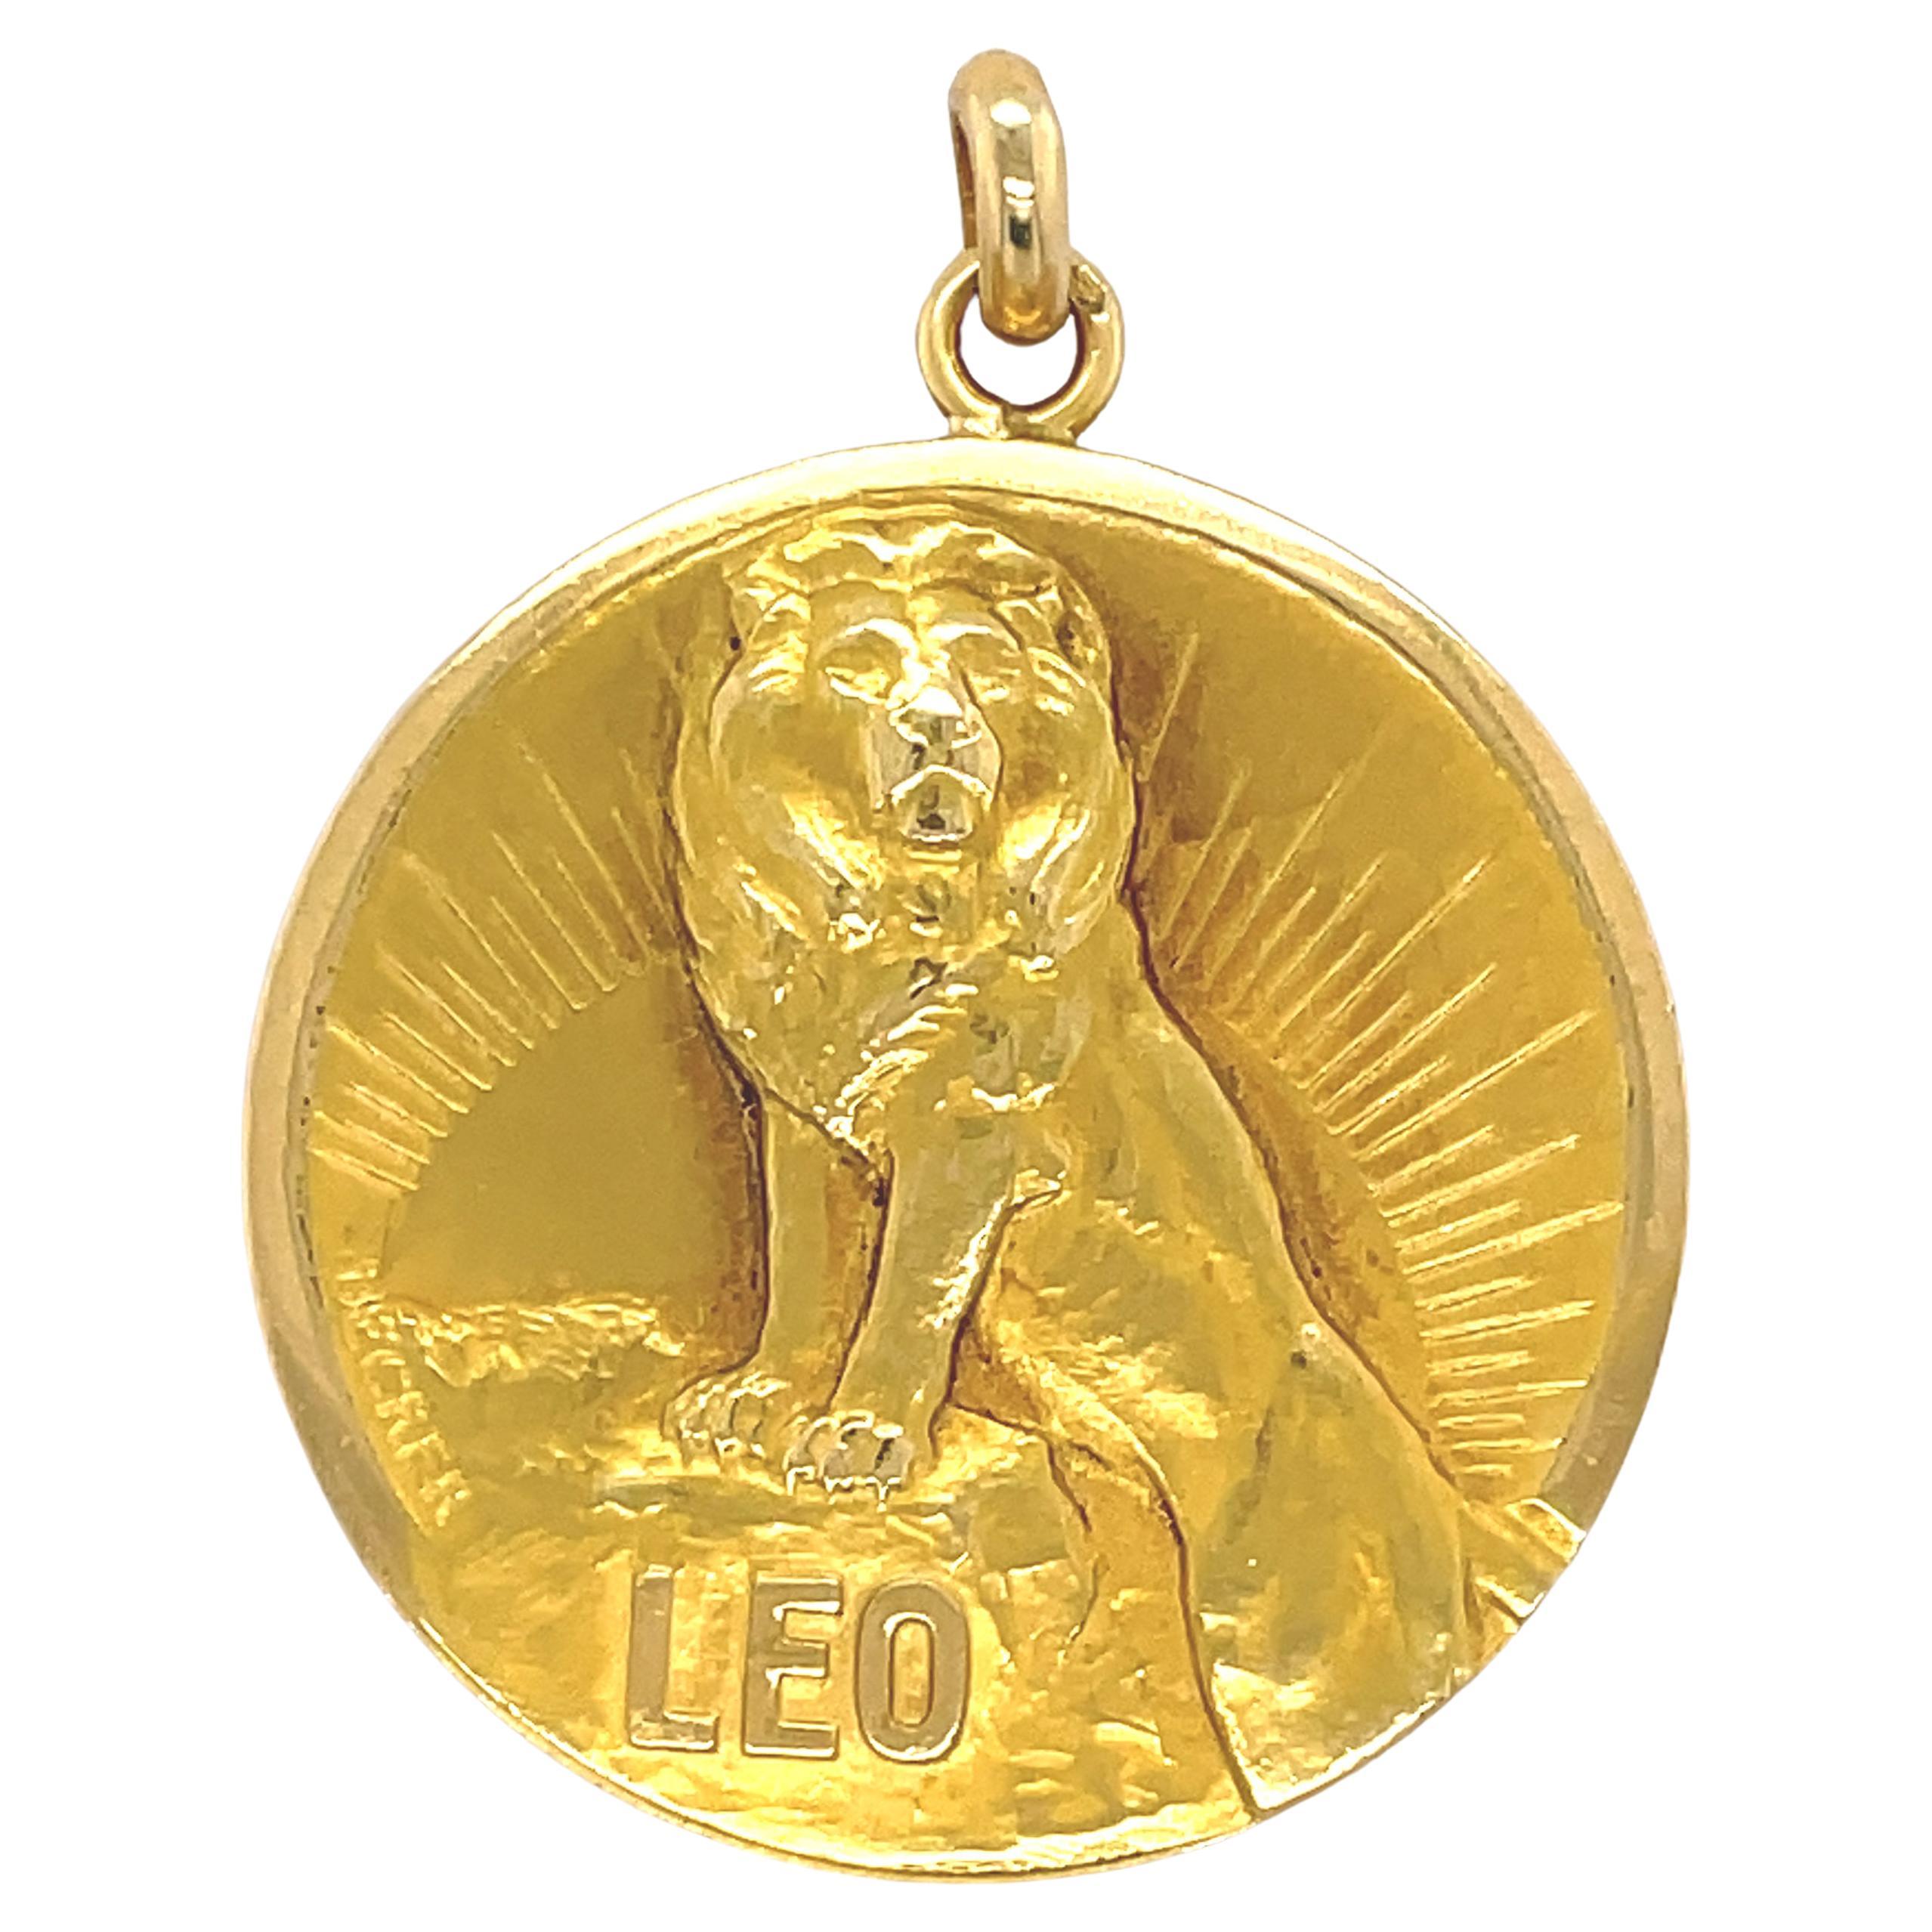 Exceptional Leo Gold Pendant by Becker